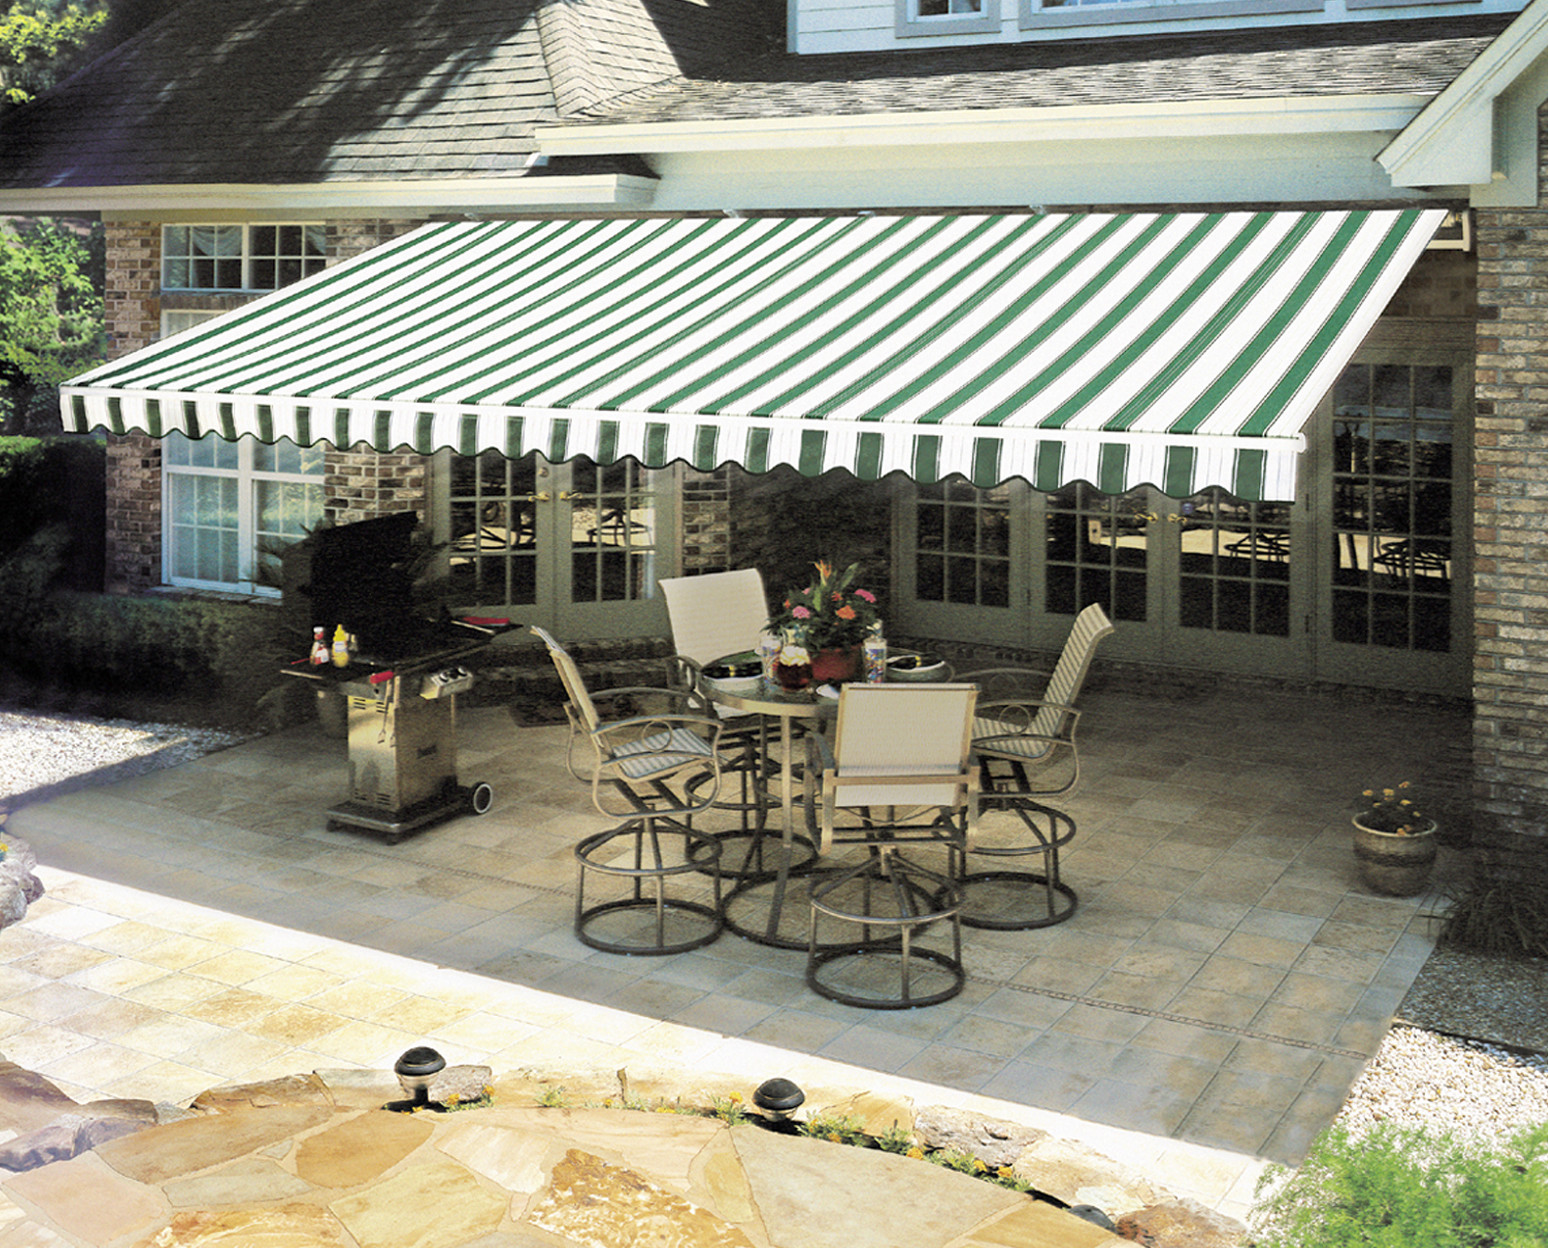 Christmas Tree Shop Awning
 5 Reasons a Retractable Awning Is a Good Financial Investment